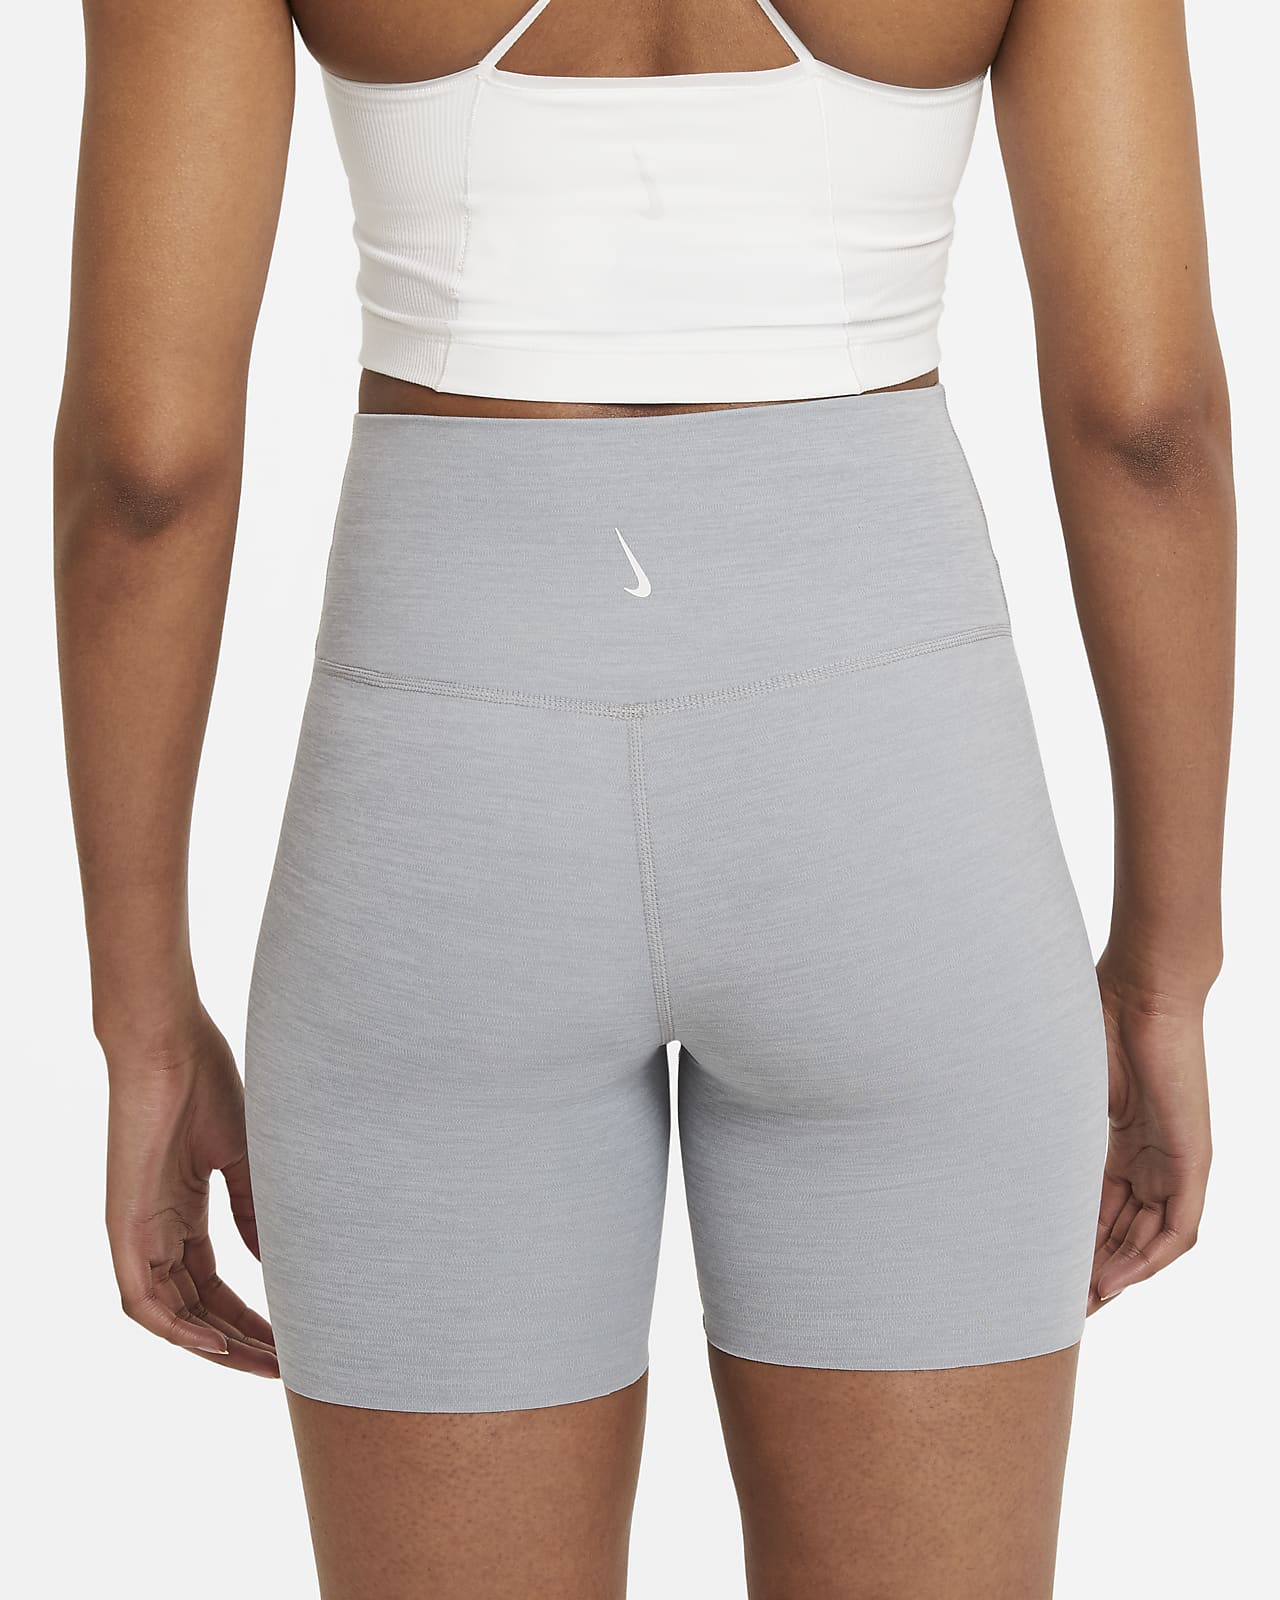 Shop Yoga Dri-FIT ADV Luxe Women's High-Waisted Shorts